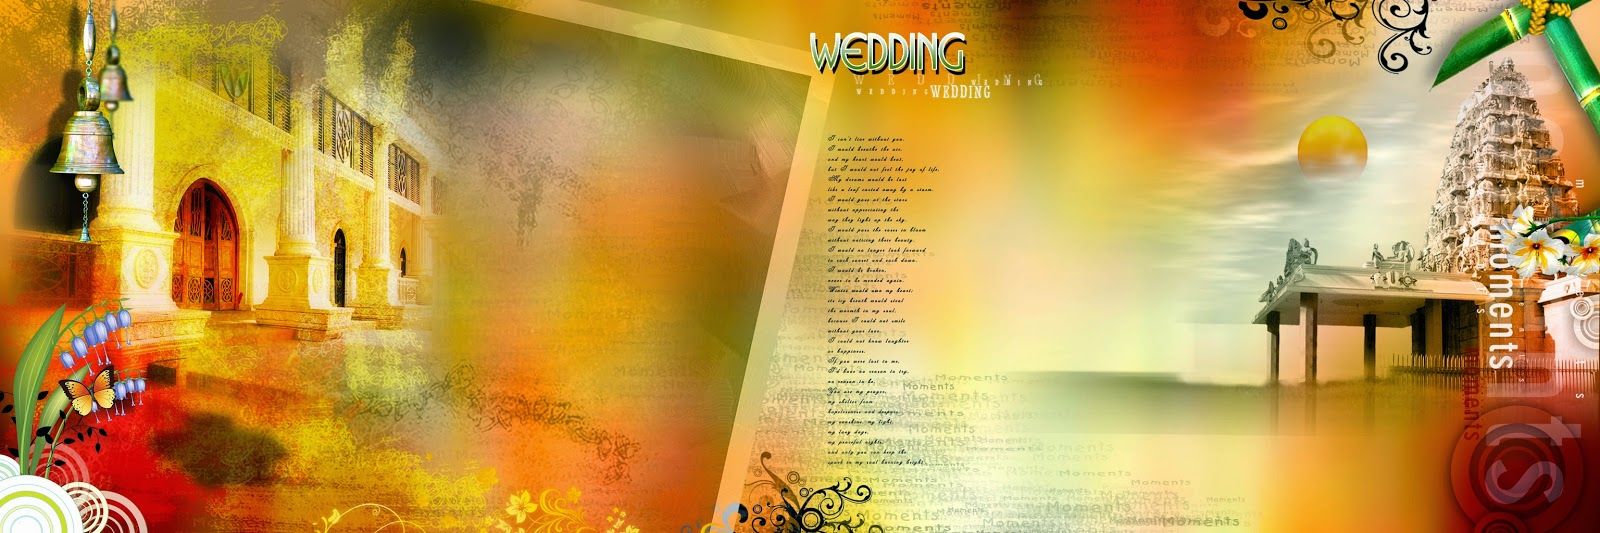 Photoshop wedding album backgrounds psd free download full